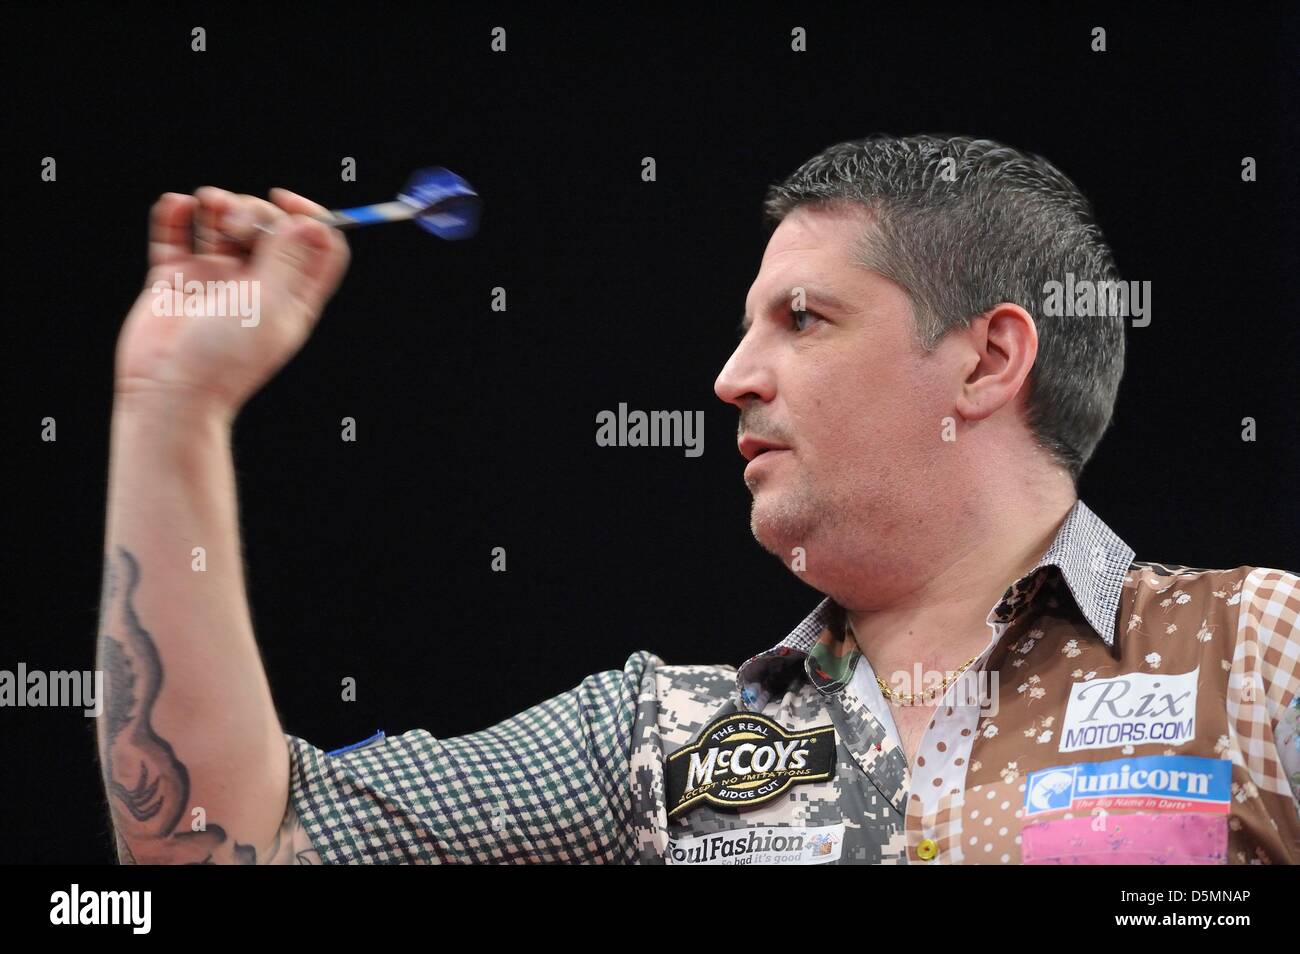 Gary anderson stock photography and images - Alamy